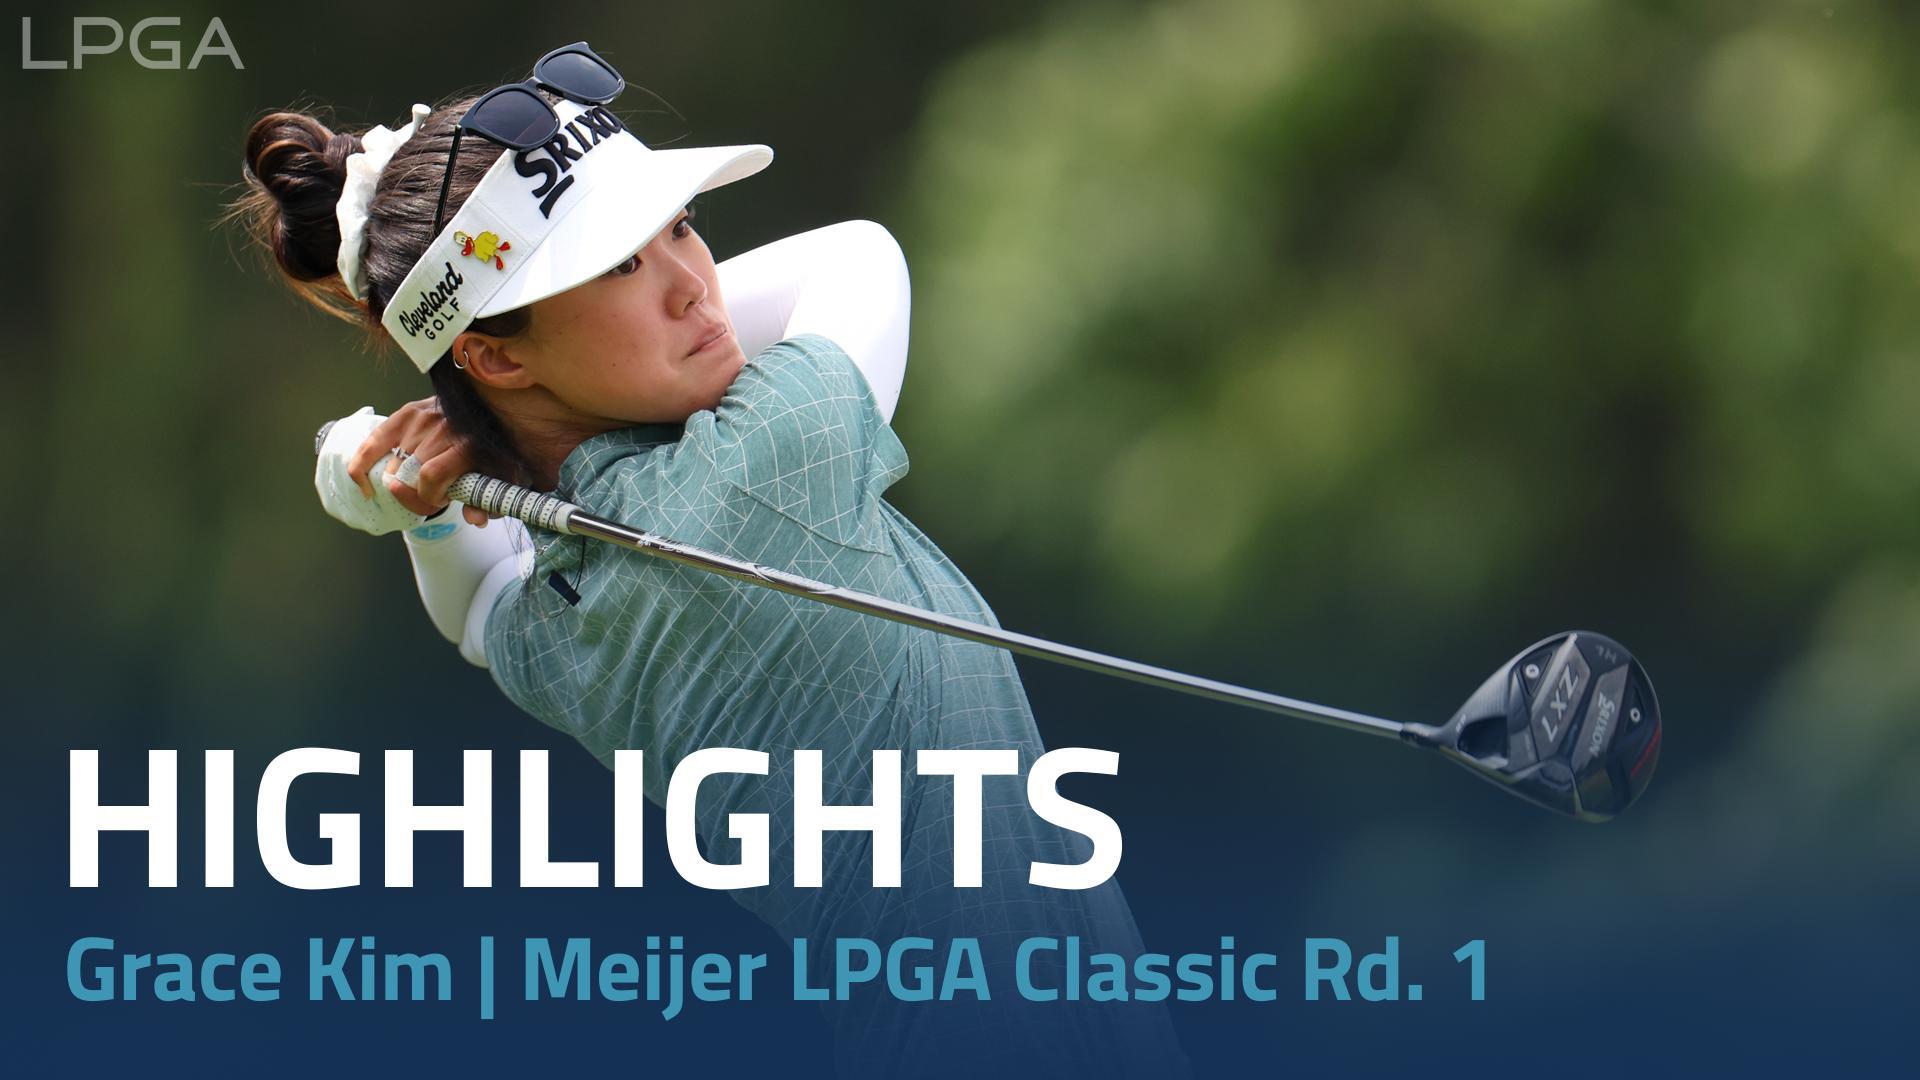 Grace Kim Highlights | Meijer LPGA Classic for Simply Give Round 1